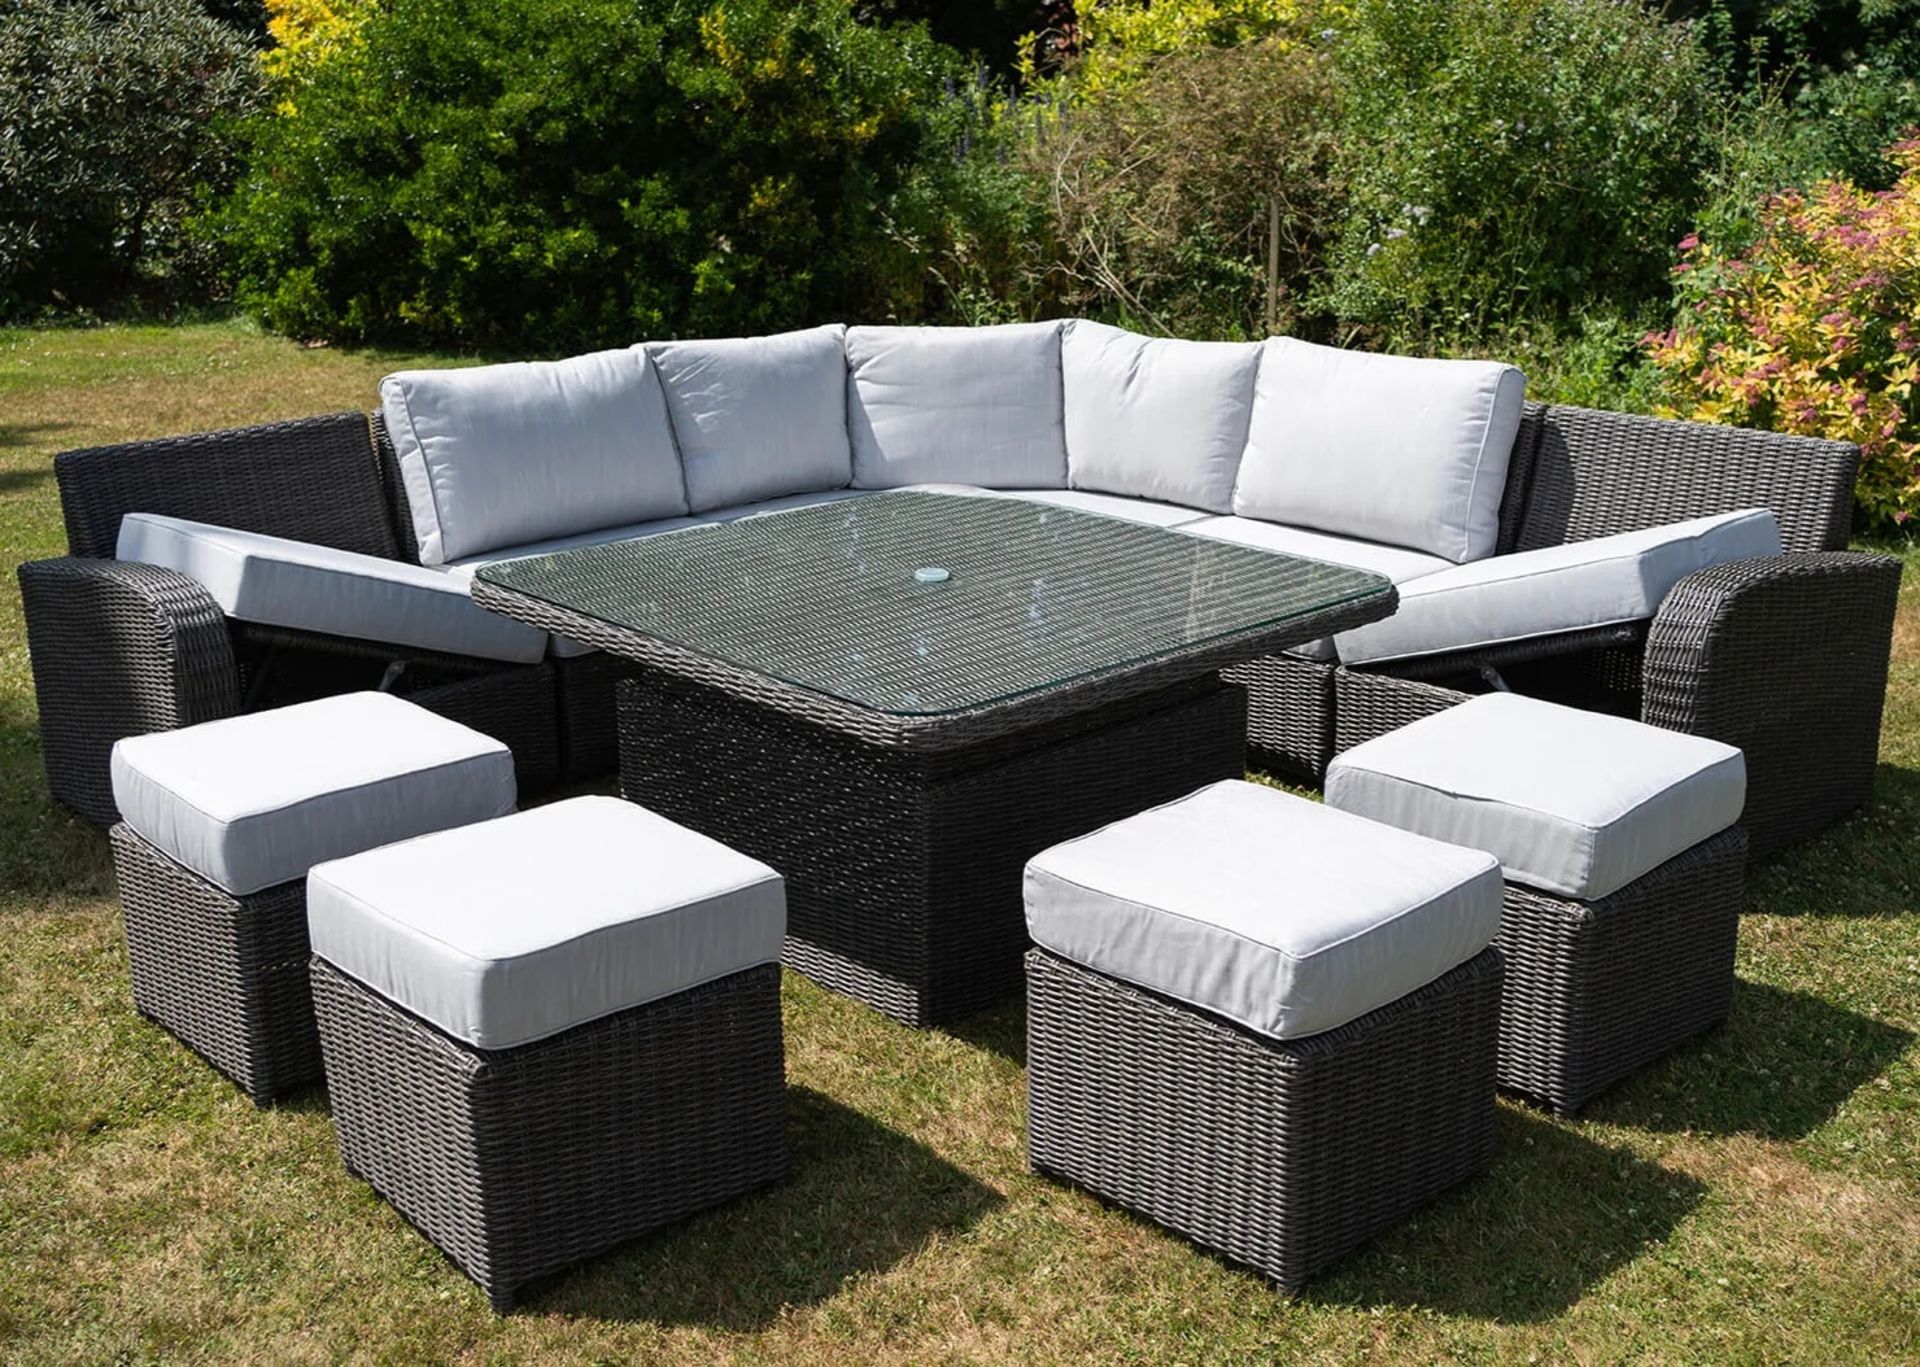 Brand New Moda Furniture, 10 Seater Outdoor Rise and Fall Table Dining Set in Grey with Grey - Image 2 of 8